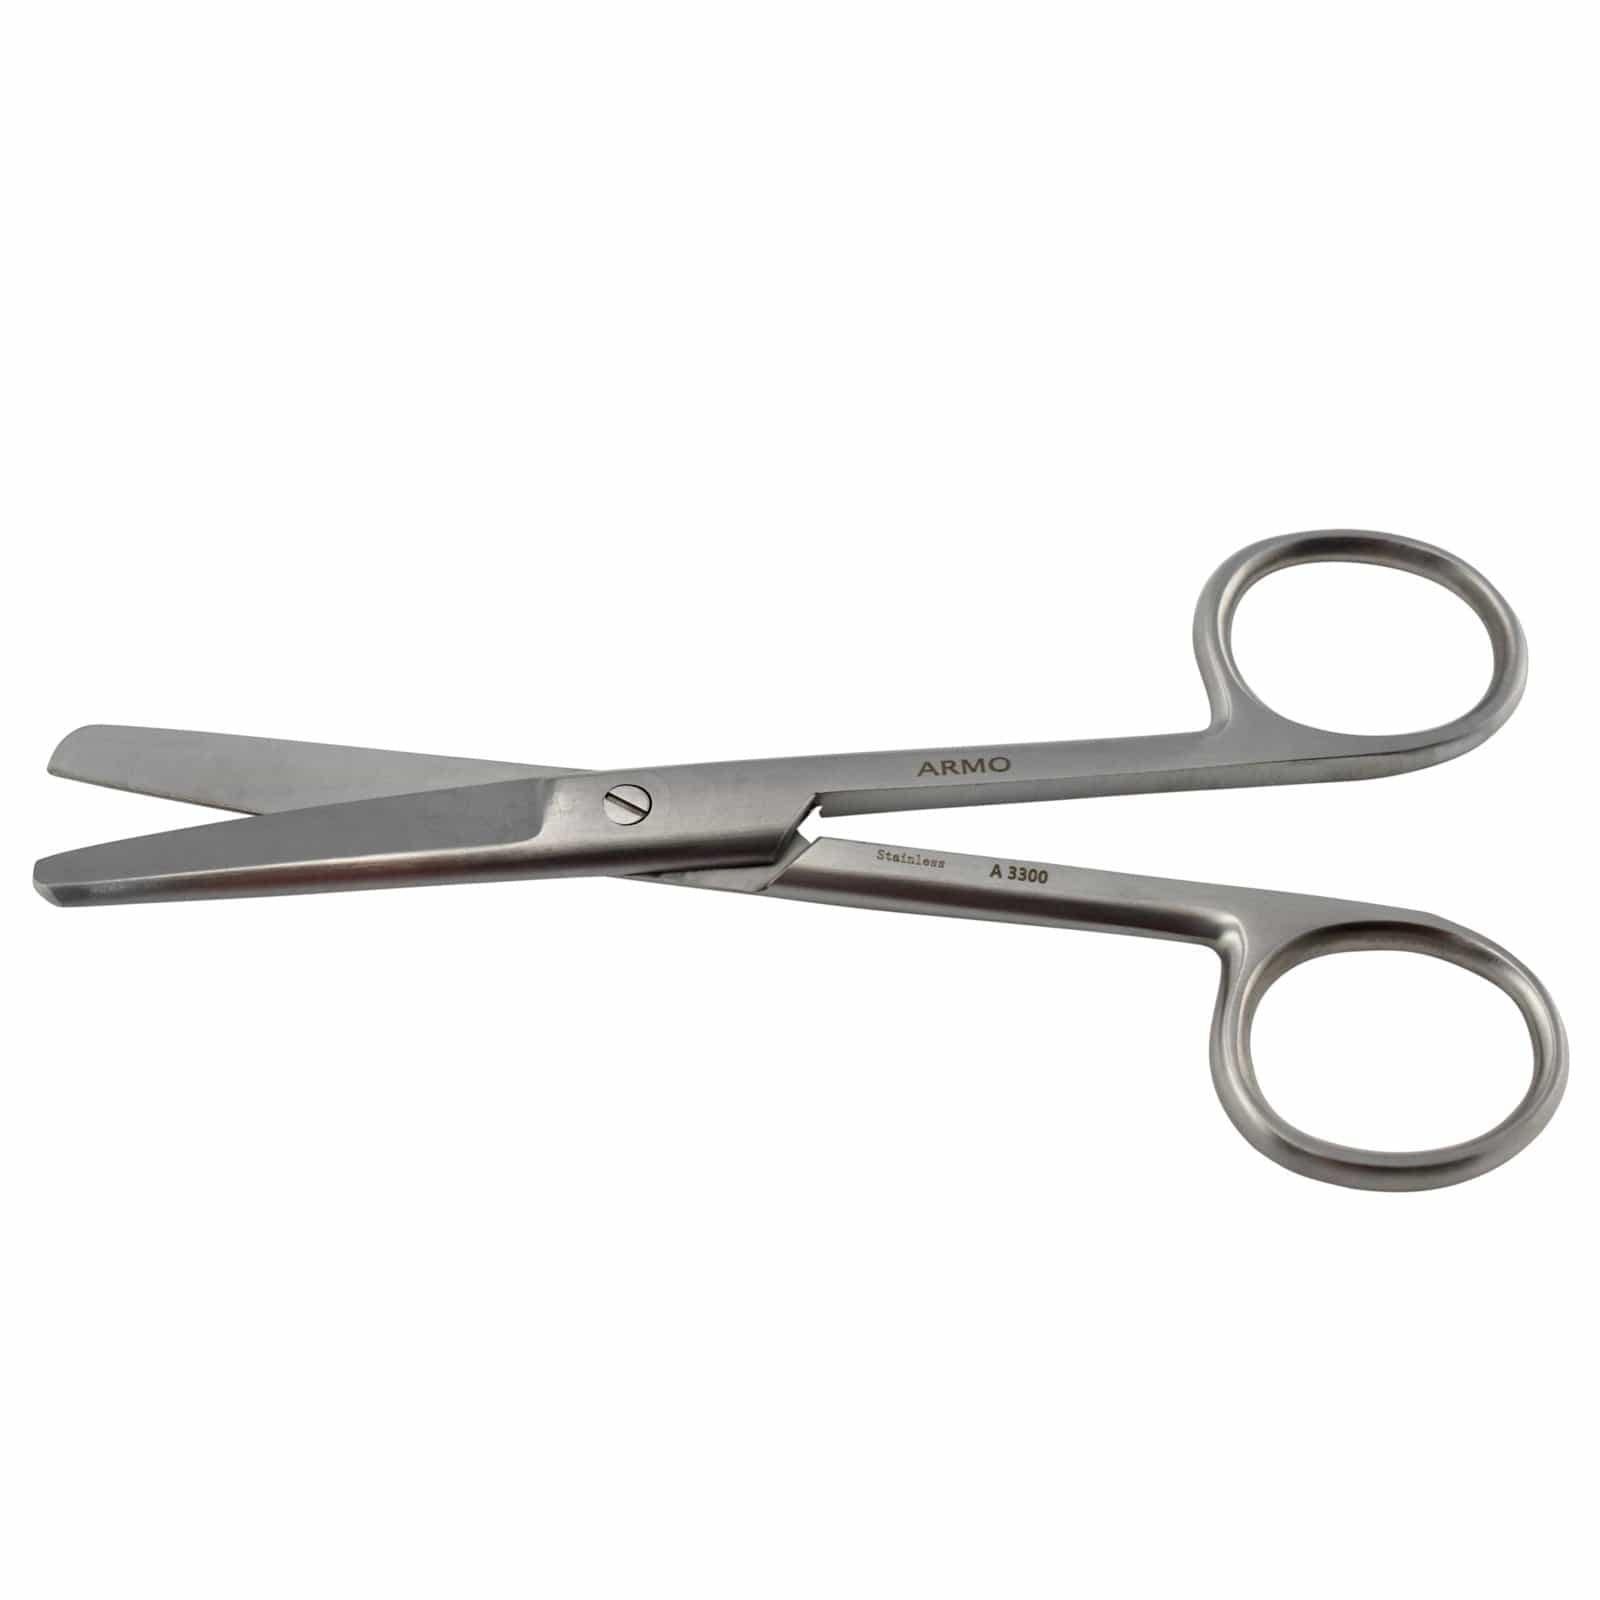 Armo Surgical Instruments 13cm / Straight / Blunt/Blunt Armo Surgical Scissors